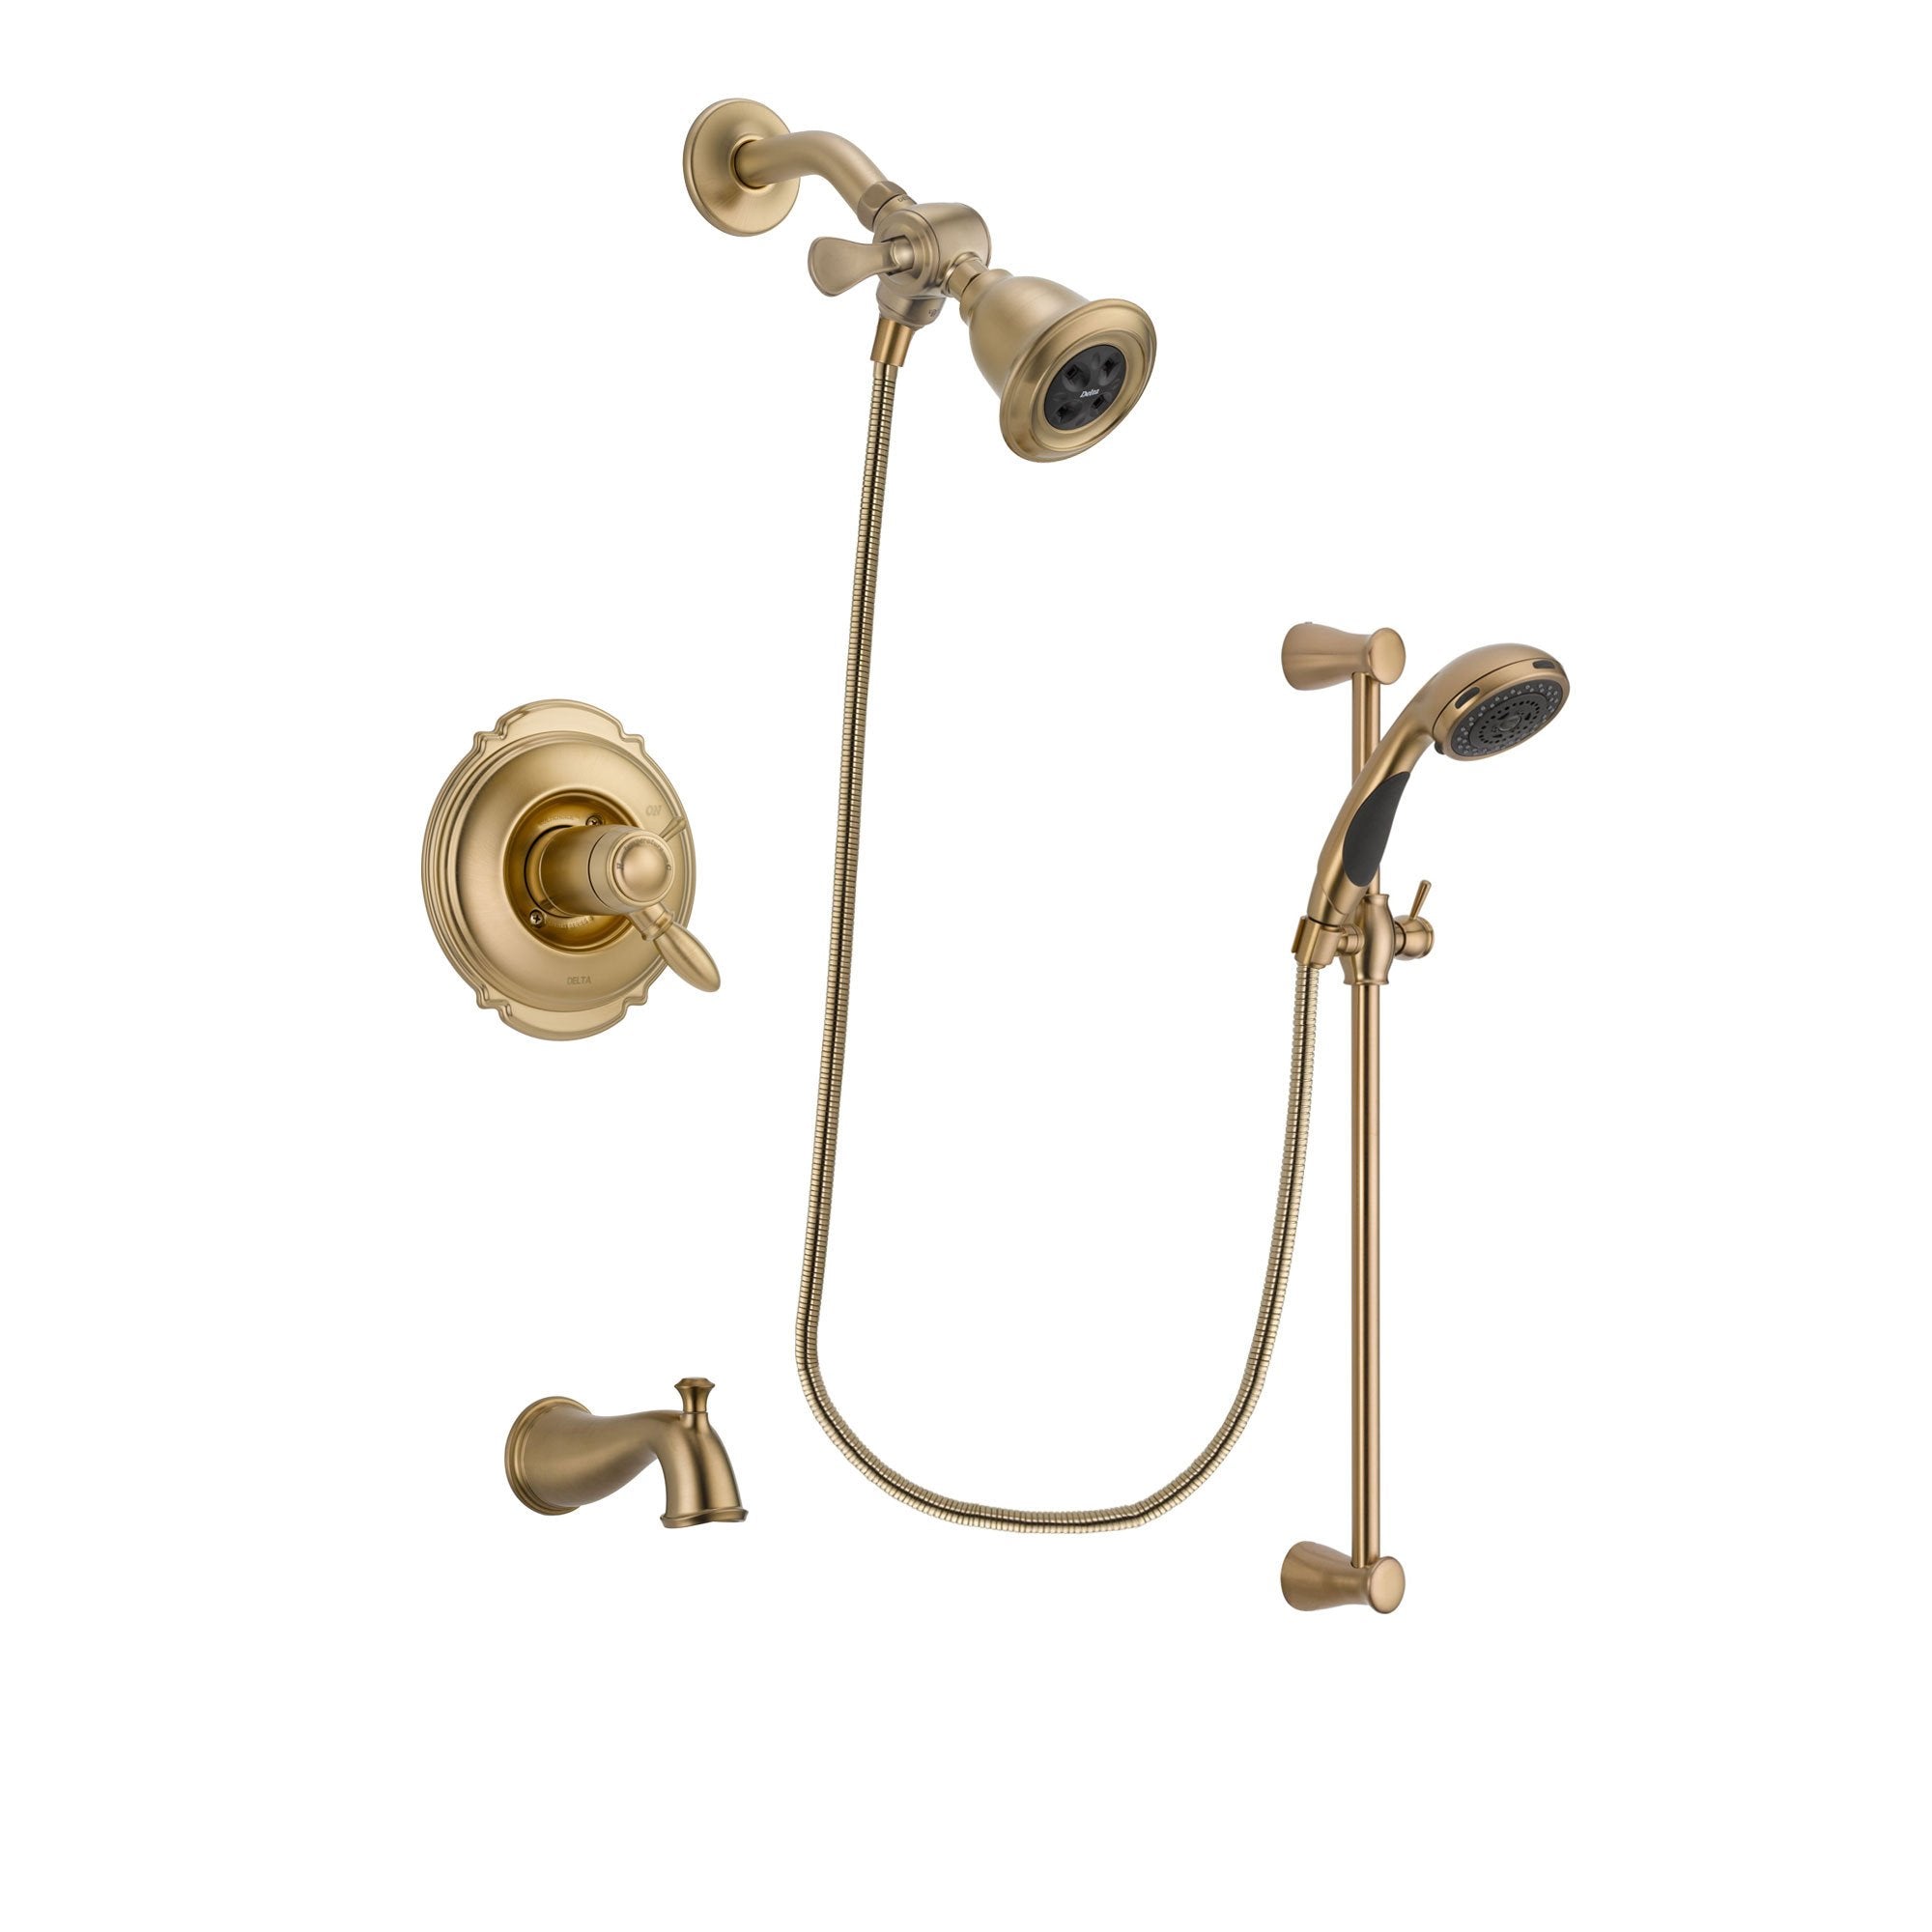 Delta Victorian Champagne Bronze Finish Thermostatic Tub and Shower Faucet System Package with Water Efficient Showerhead and Personal Handheld Shower Sprayer with Slide Bar Includes Rough-in Valve and Tub Spout DSP3449V